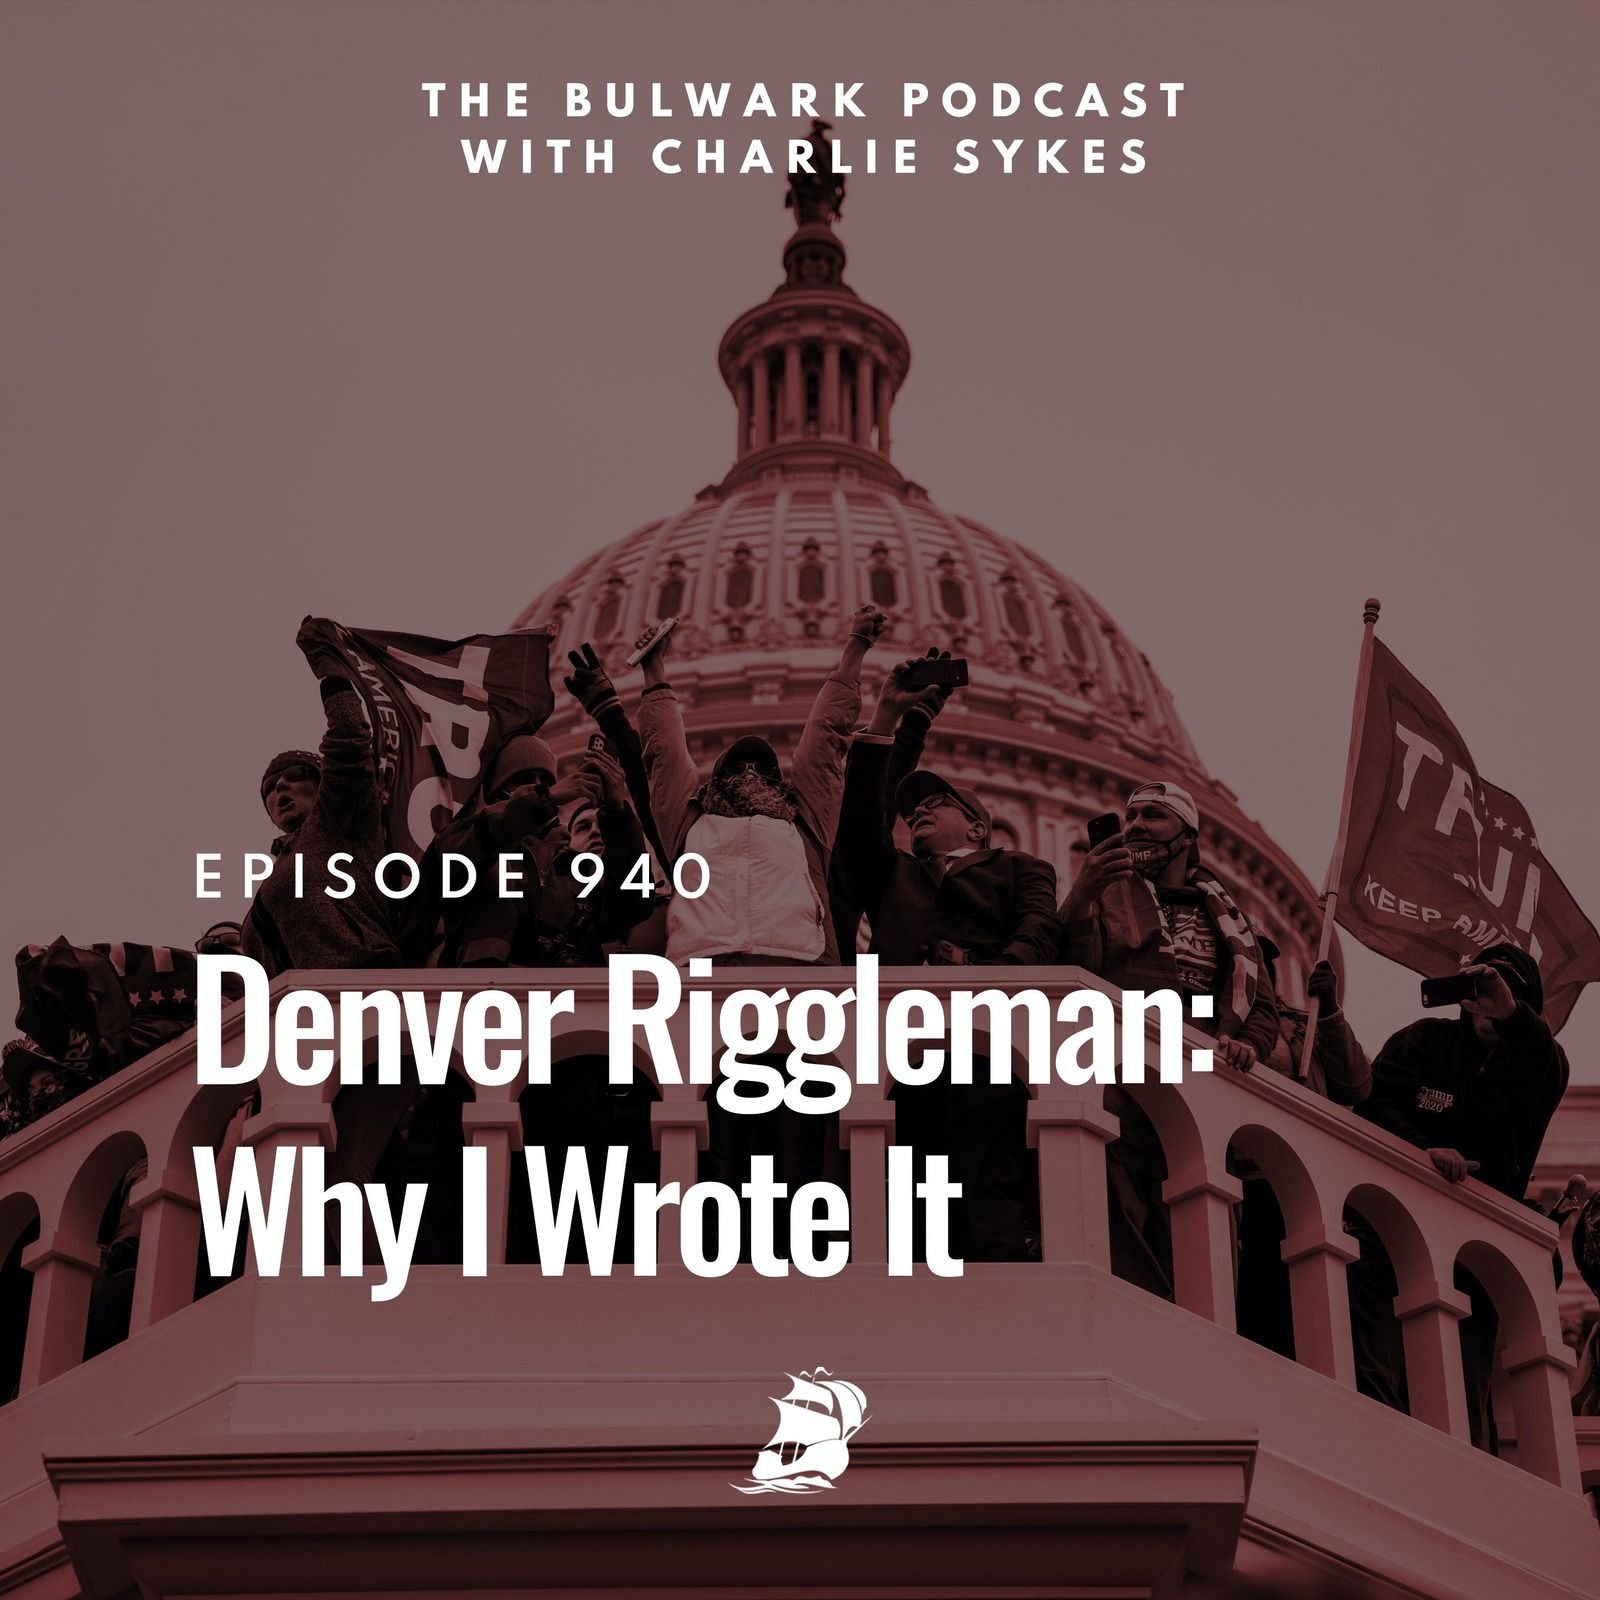 Denver Riggleman: Why I Wrote It by The Bulwark Podcast